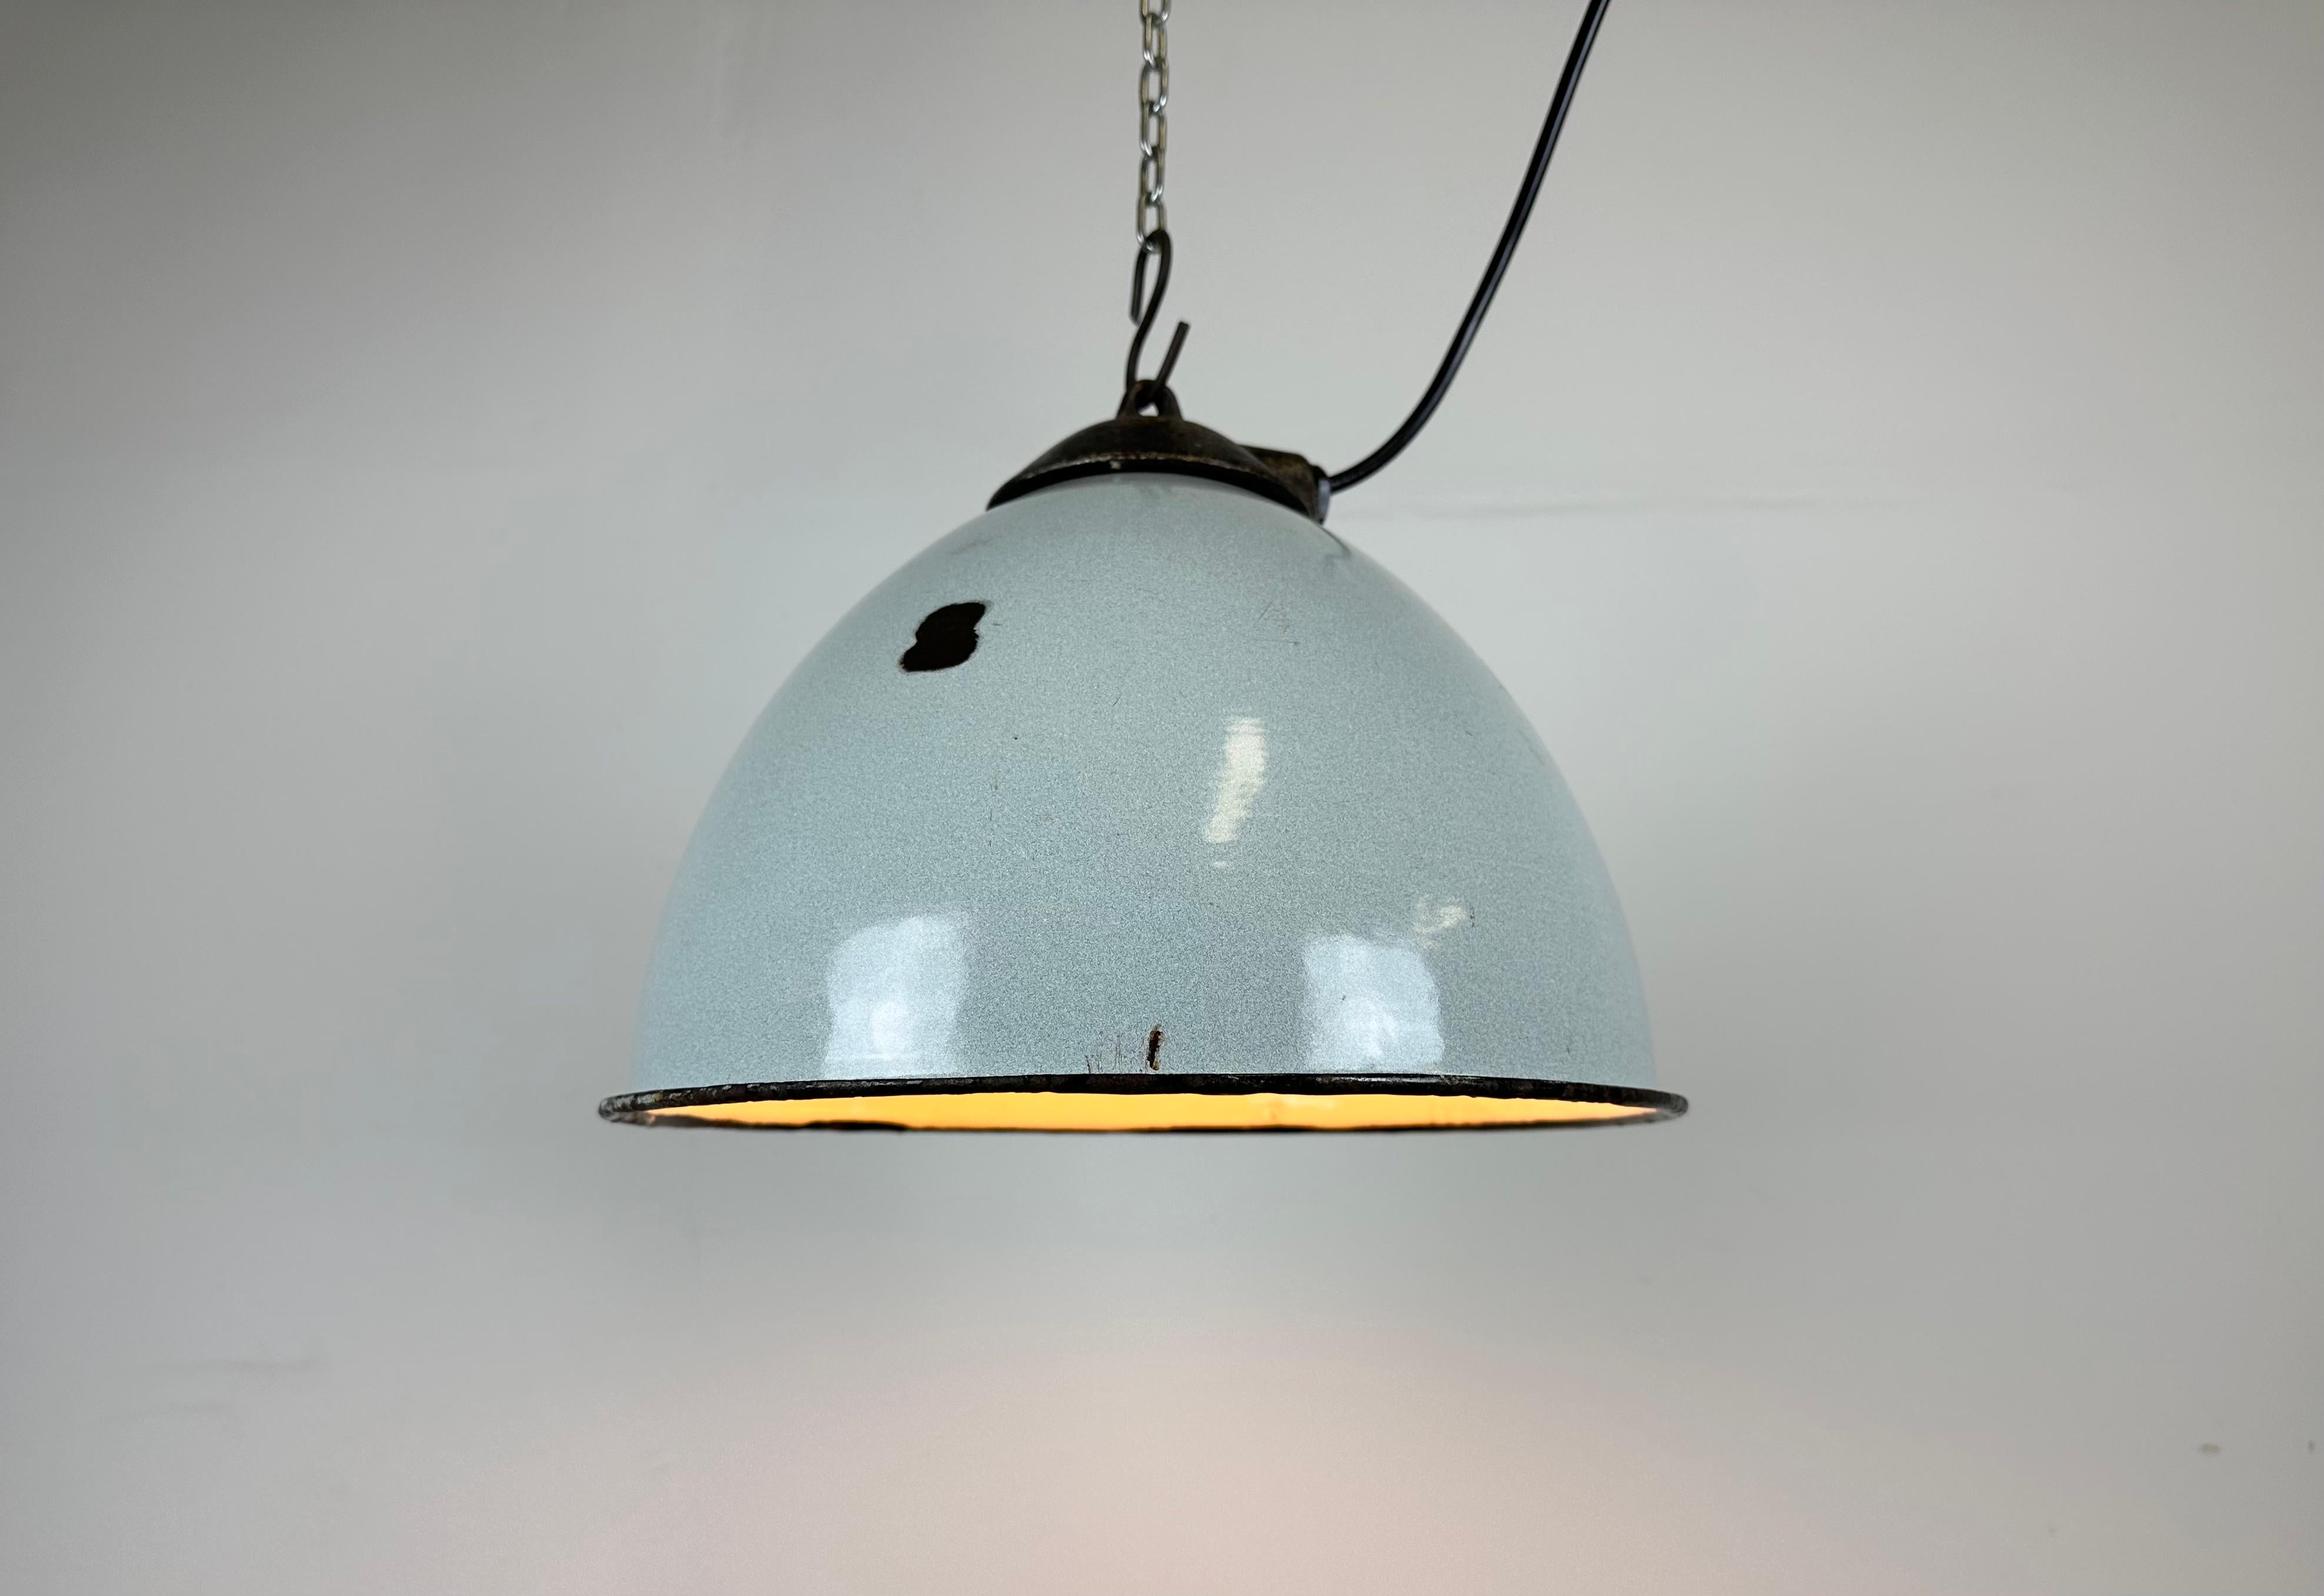 Industrial Grey Enamel Factory Lamp with Cast Iron Top, 1960s For Sale 3